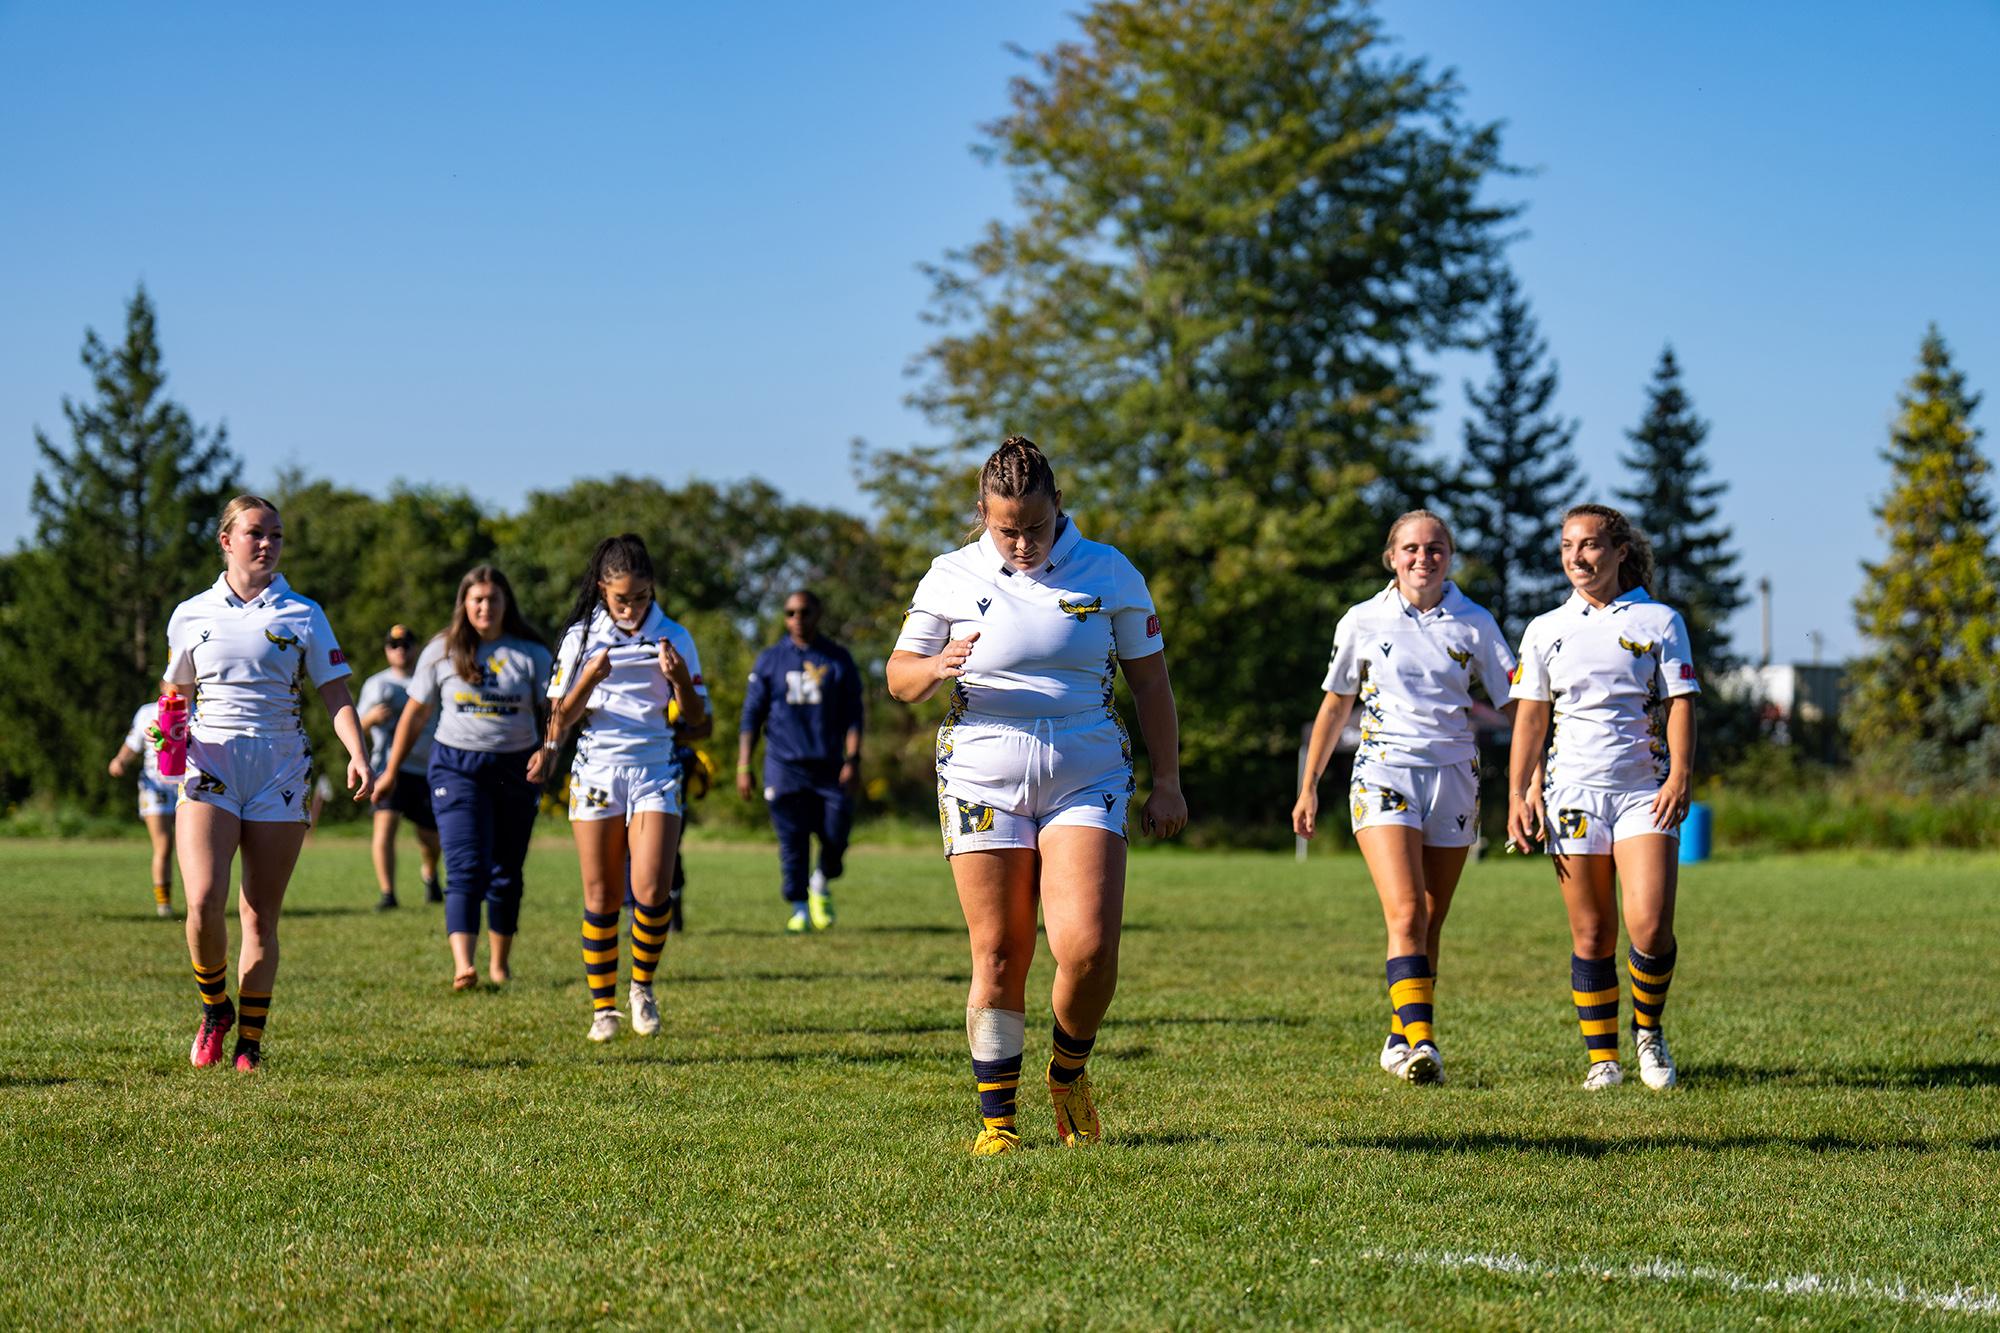 A group of athletes wearing Humber rugby jerseys walk across a field.